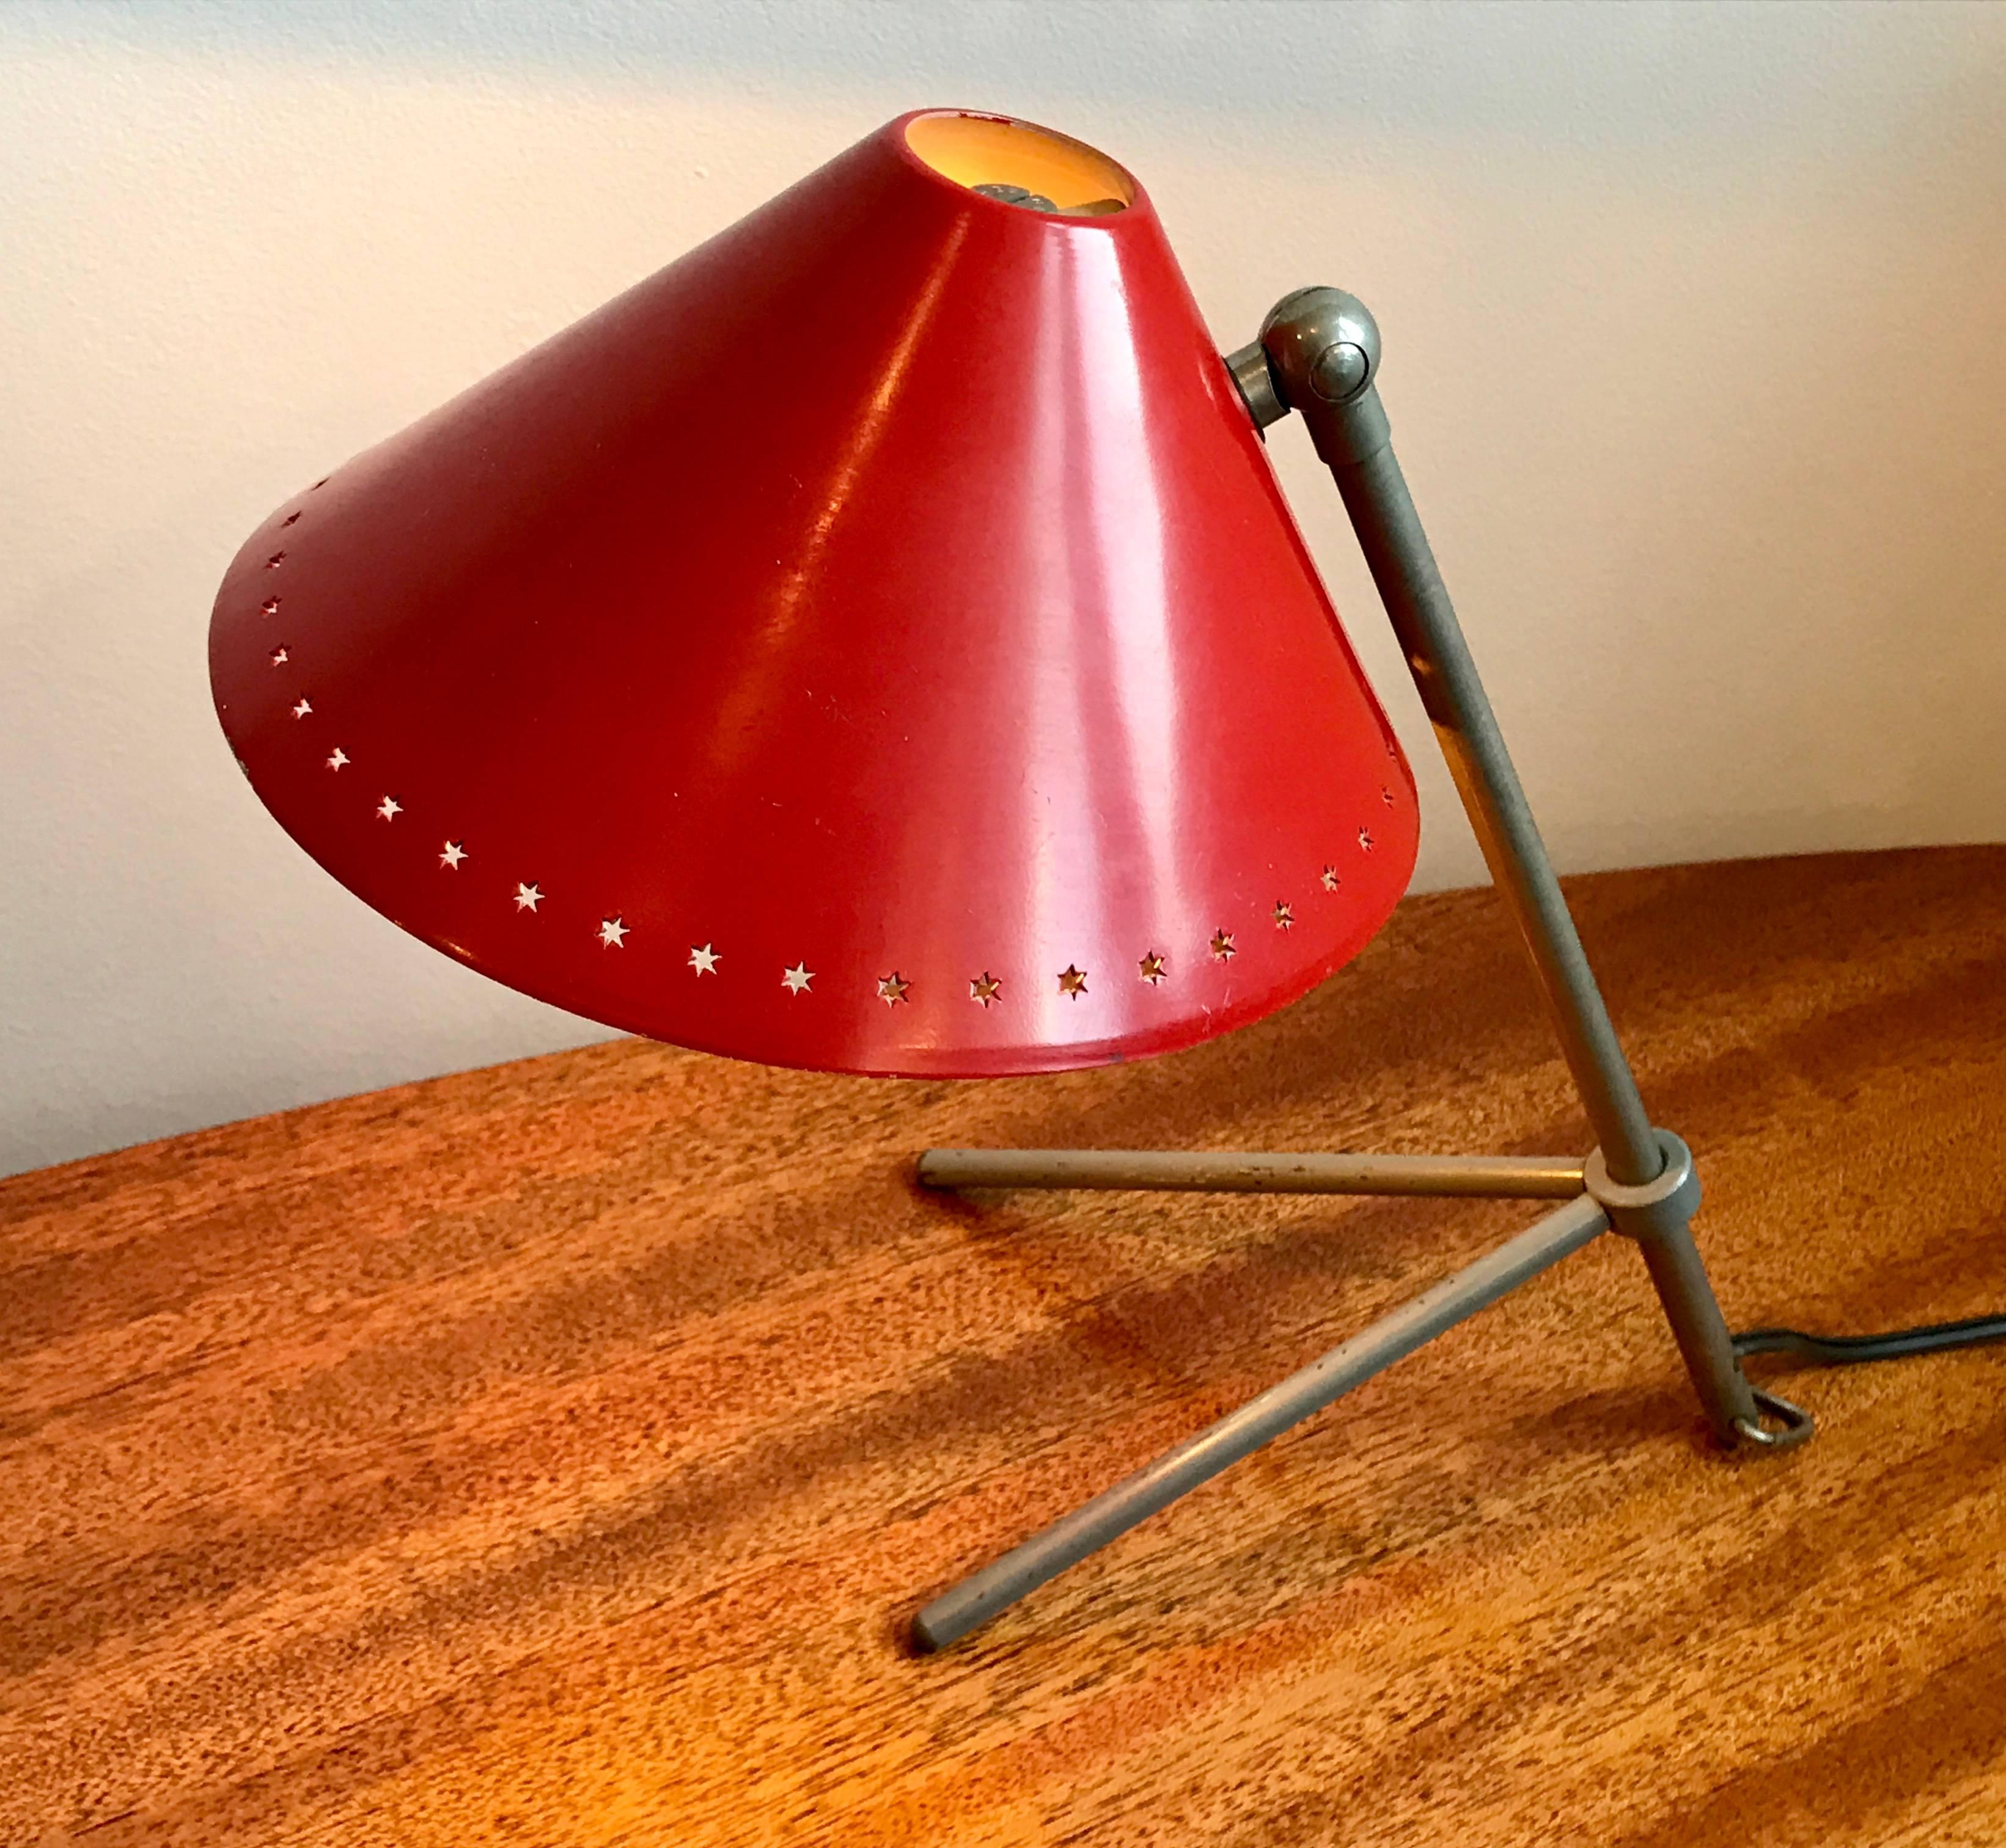 Pinocchio, table or wall mount lamp designed by H. Busquet, circa 1950.
Manufactured by Hala Zeist, Netherlands, circa 1950.
Adjustable metal tripod base, vibrant red lacquered shade.